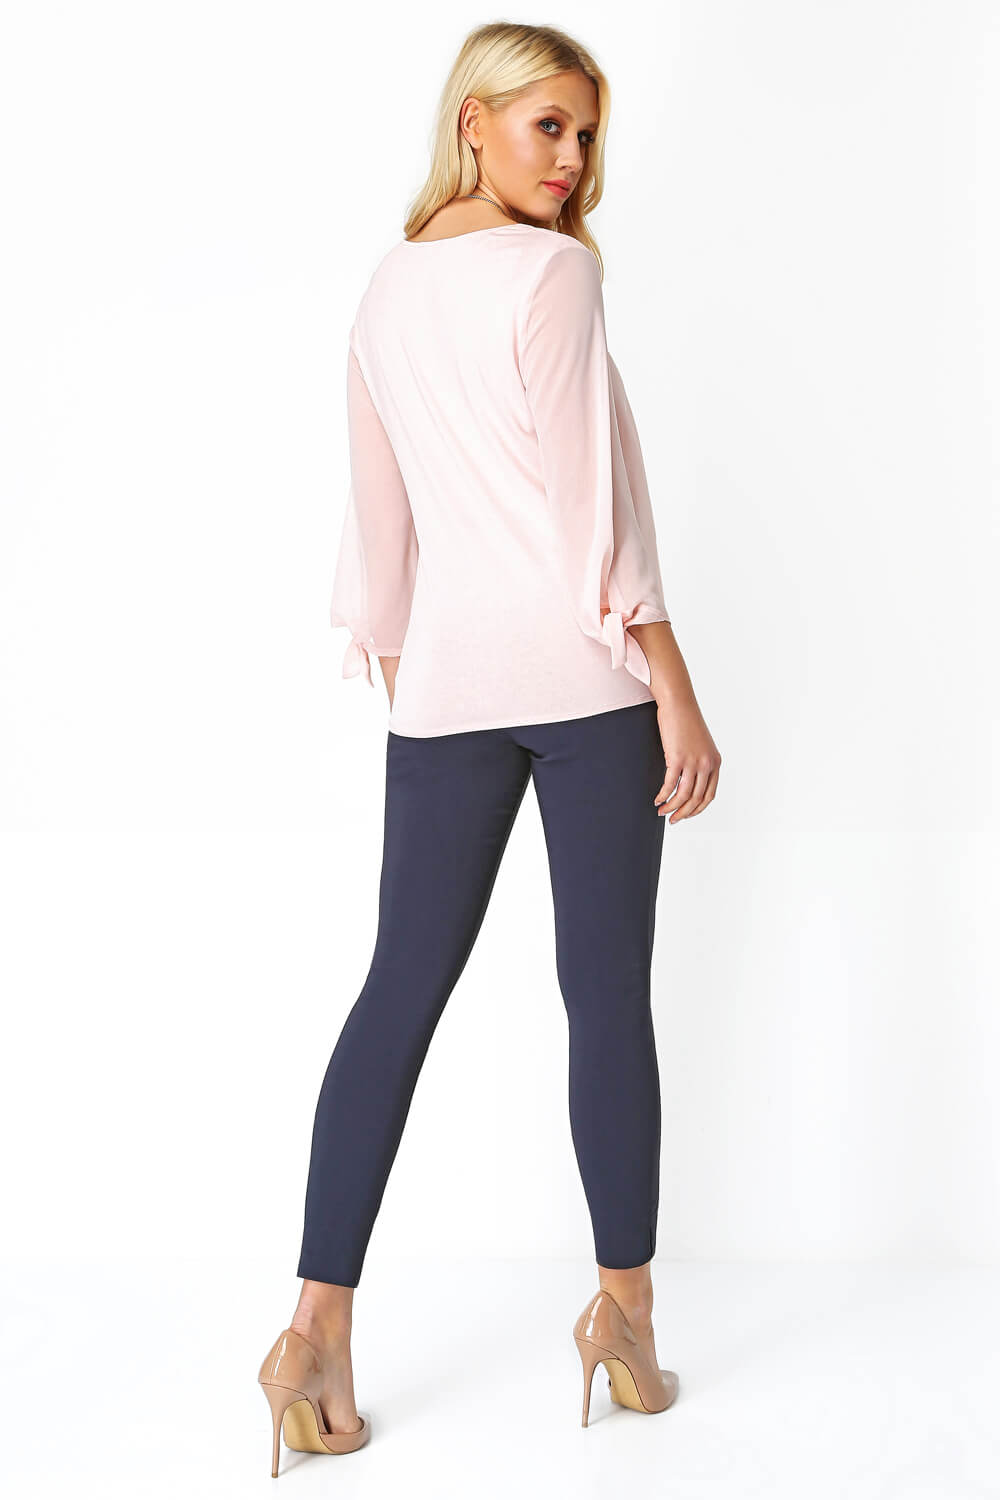 PINK Necklace Trim Jersey 3/4 Sleeve Chiffon Top, Image 3 of 4